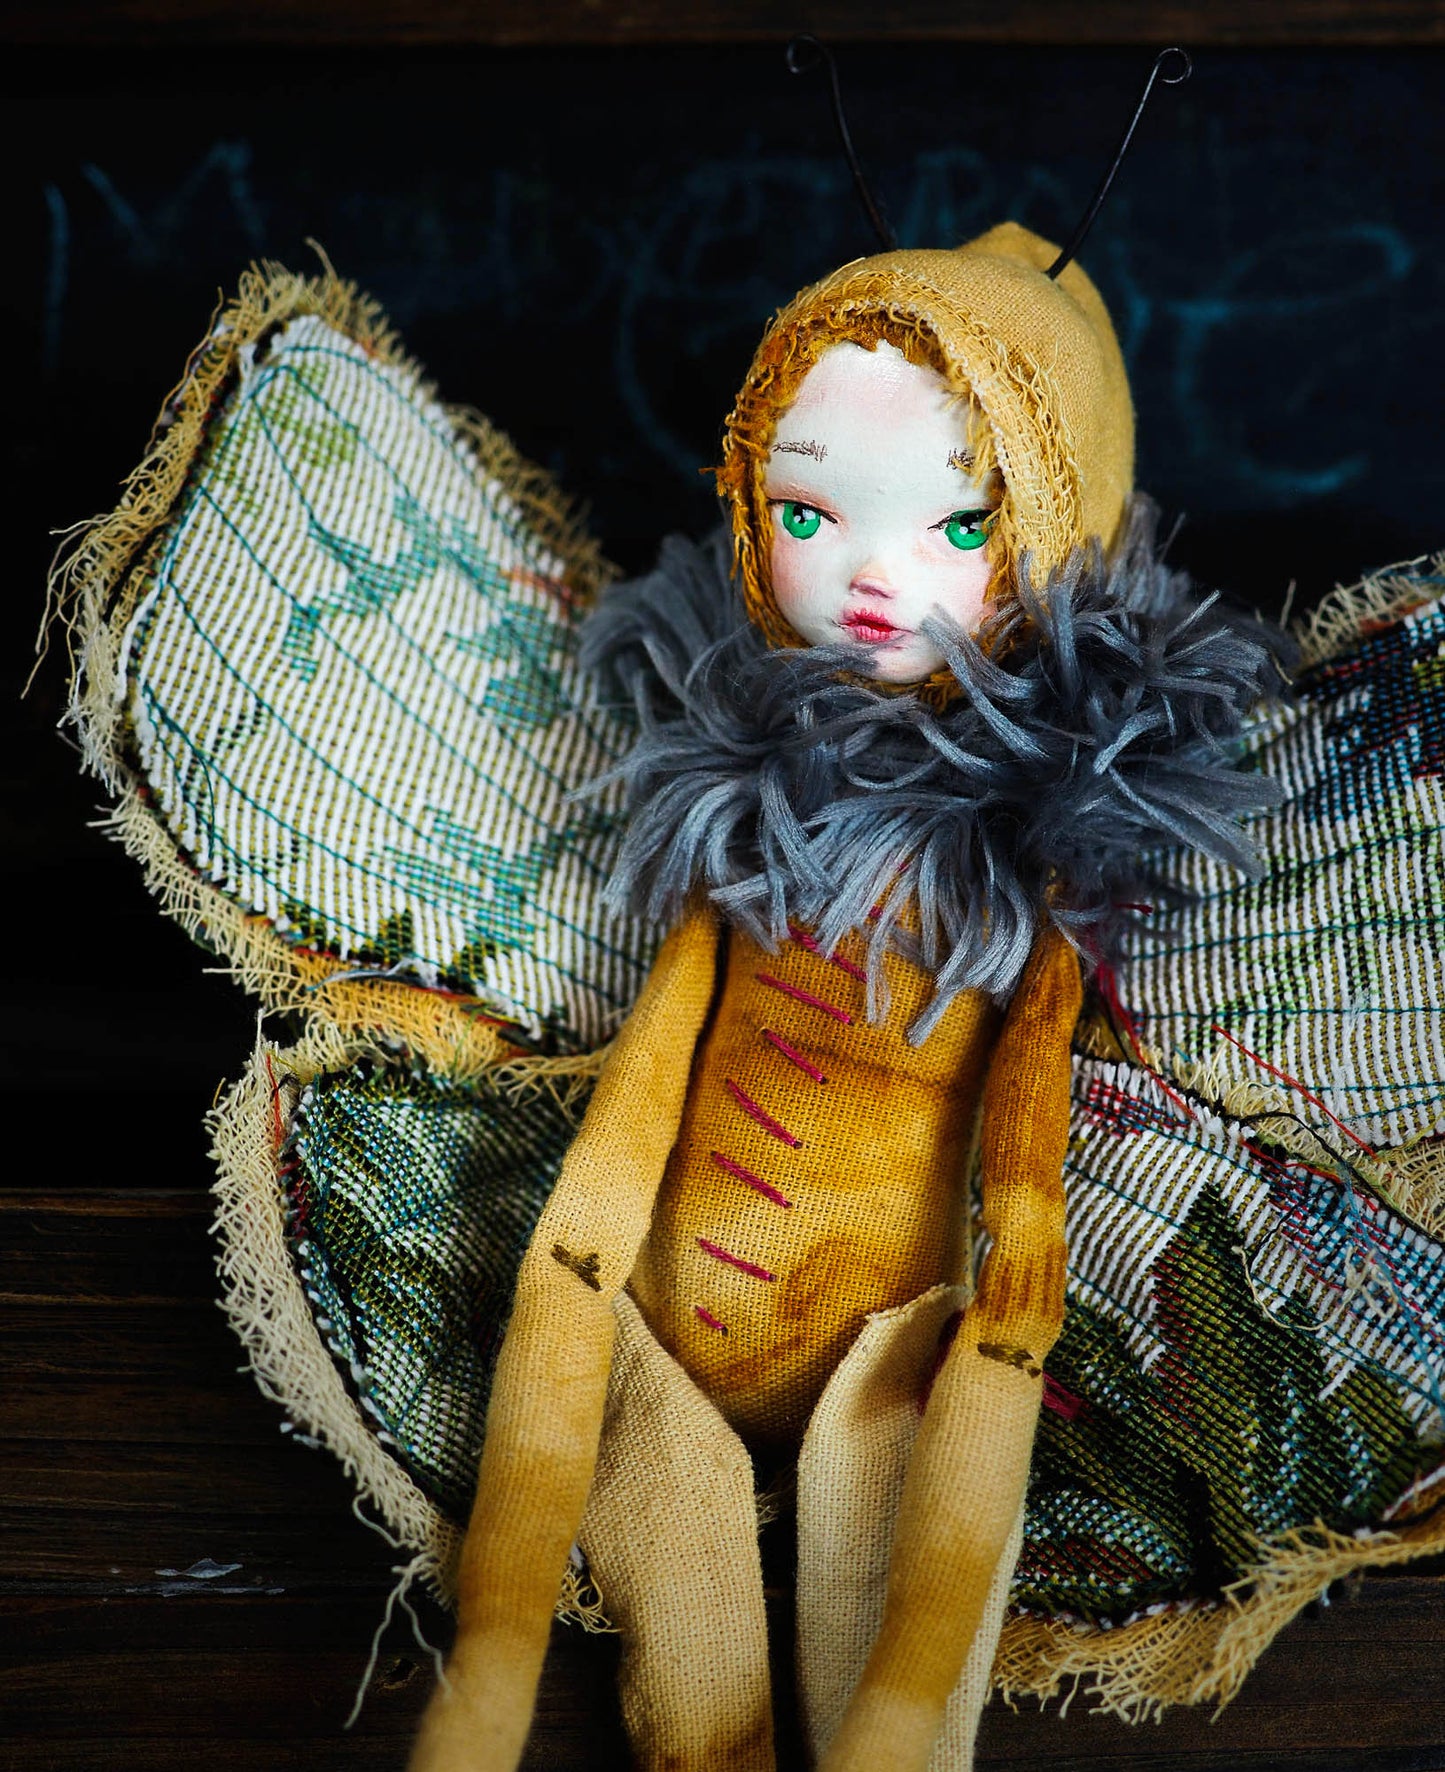 Inspired by nature, Danita created a handmade art doll moth, or night butterfly using organic materials like vintage and hand dyed fabric, wire and clay on a melancholic articulated soft sculpture. An art doll toy that celebrates nature's creations and the beautiful wings of insects with a bit of magic fairy on them.